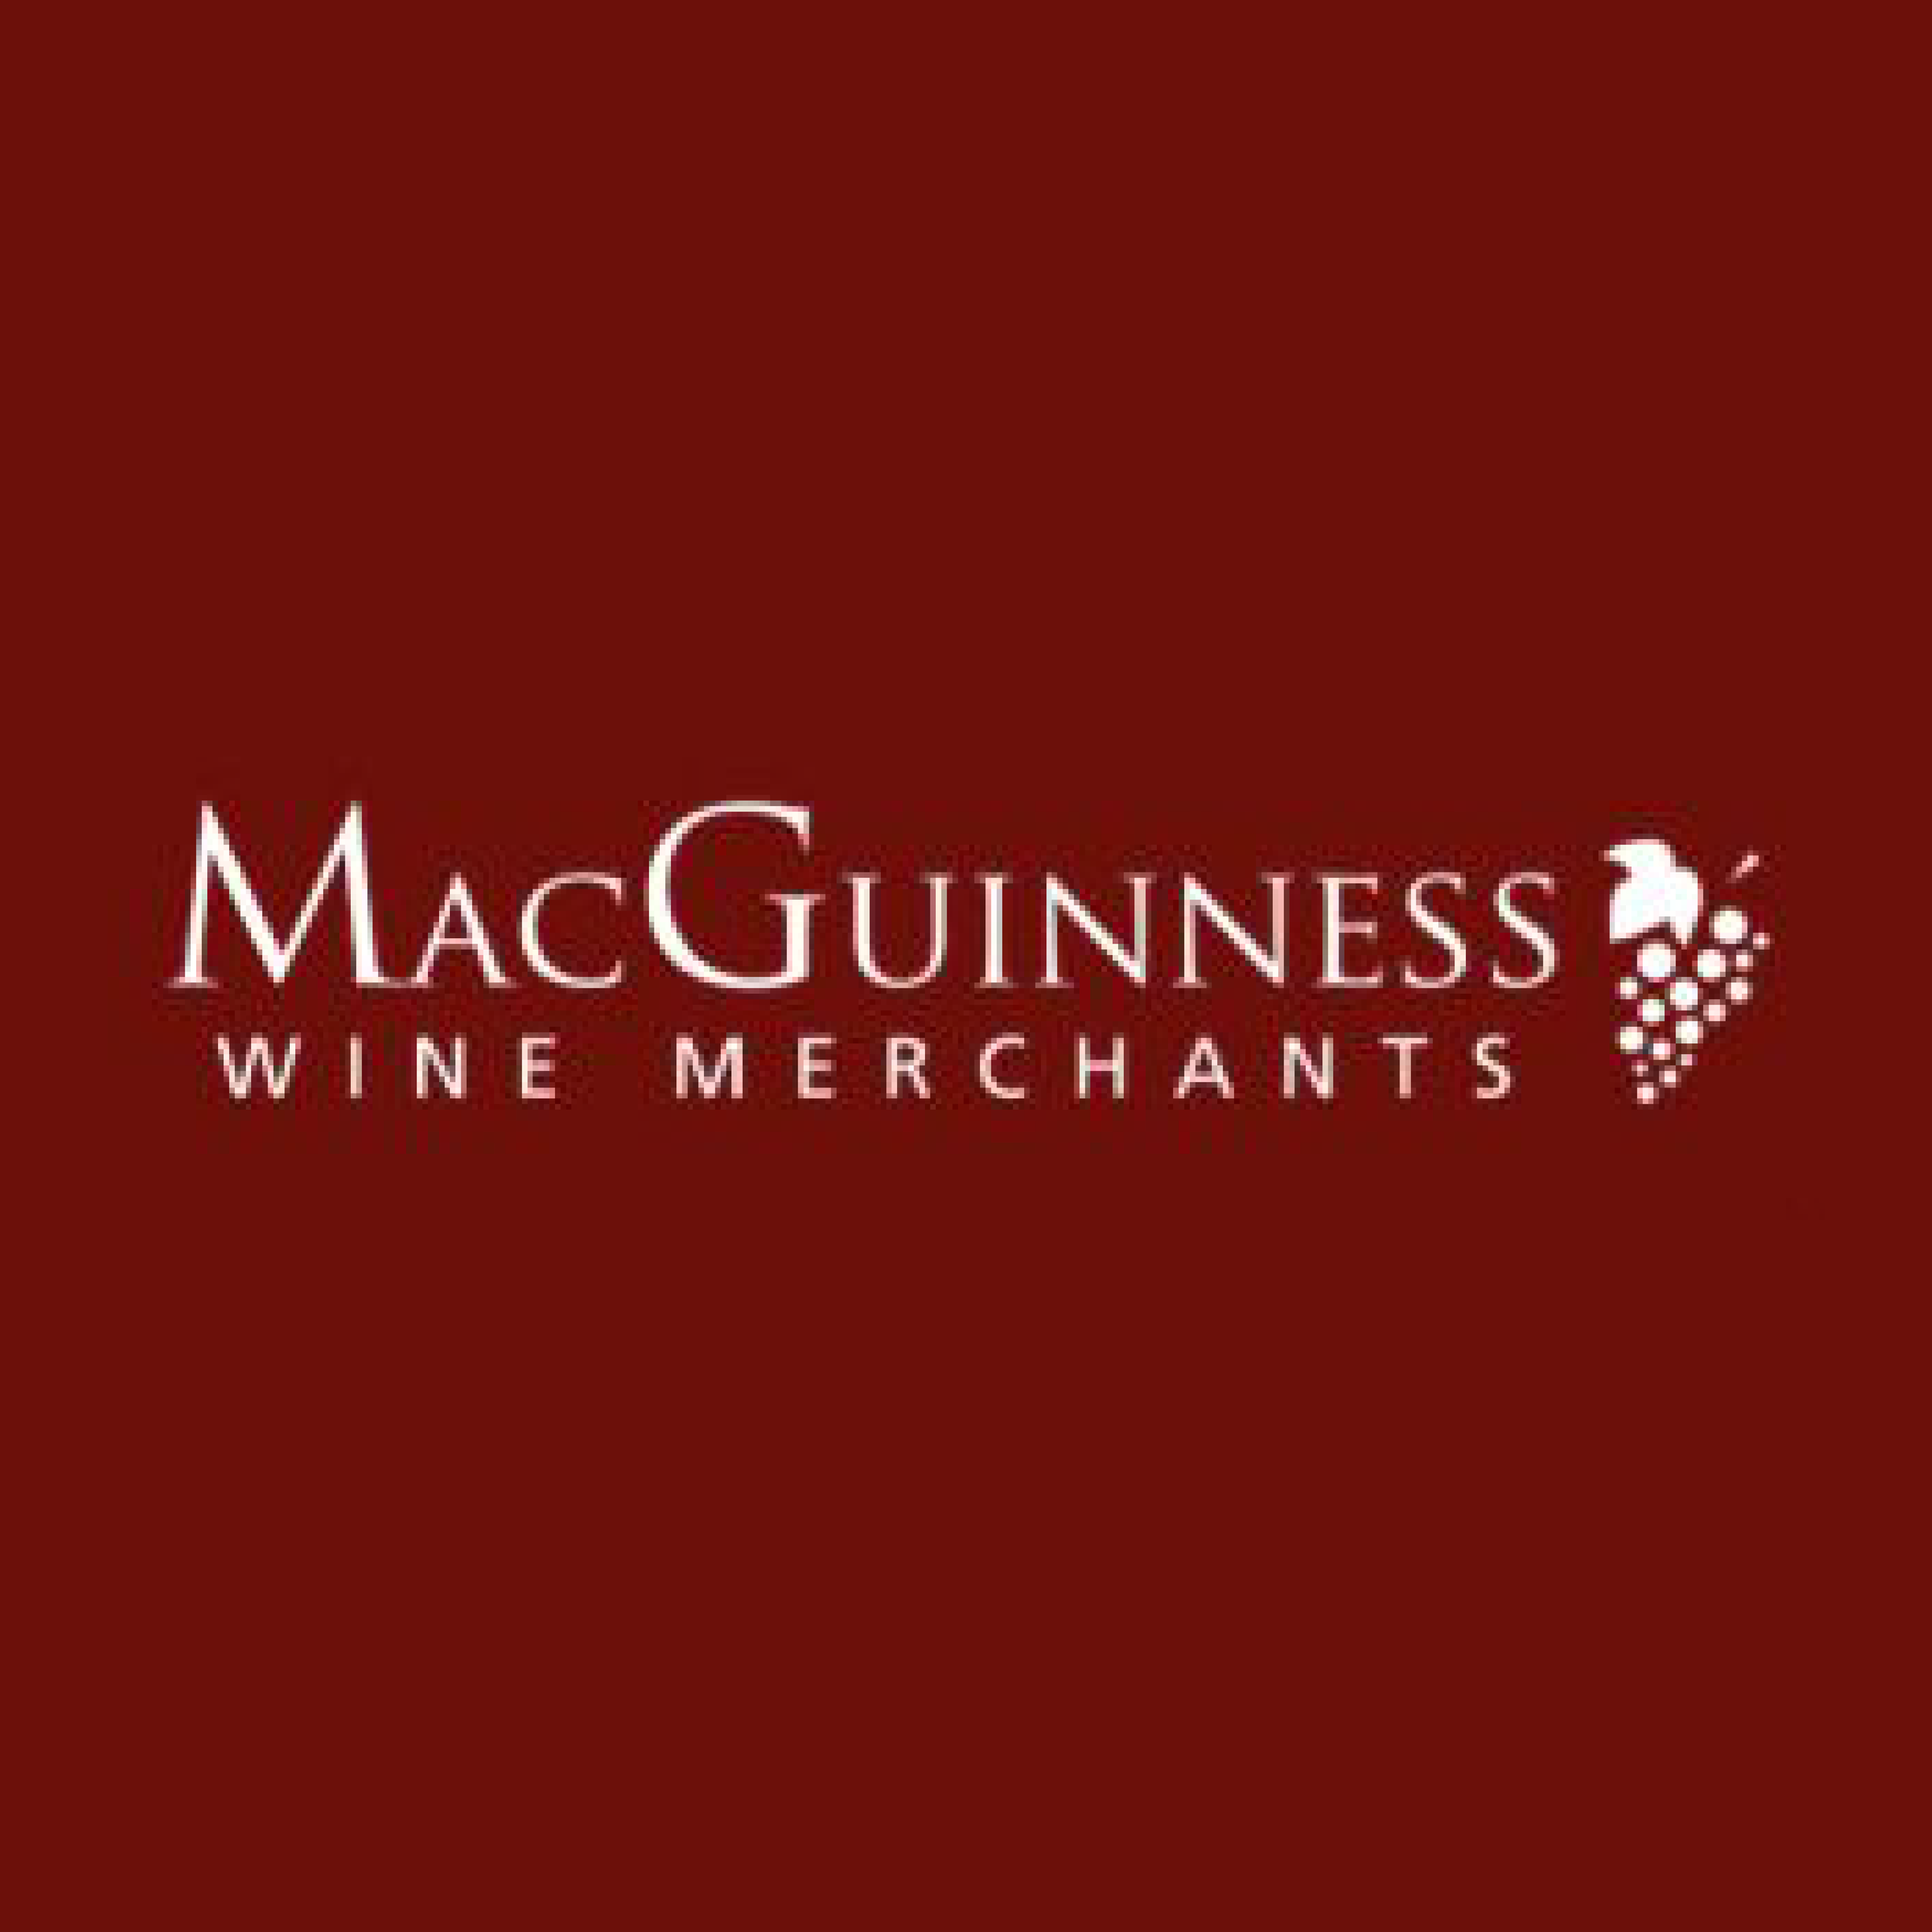 MCGUINNESS-winemerchants.png